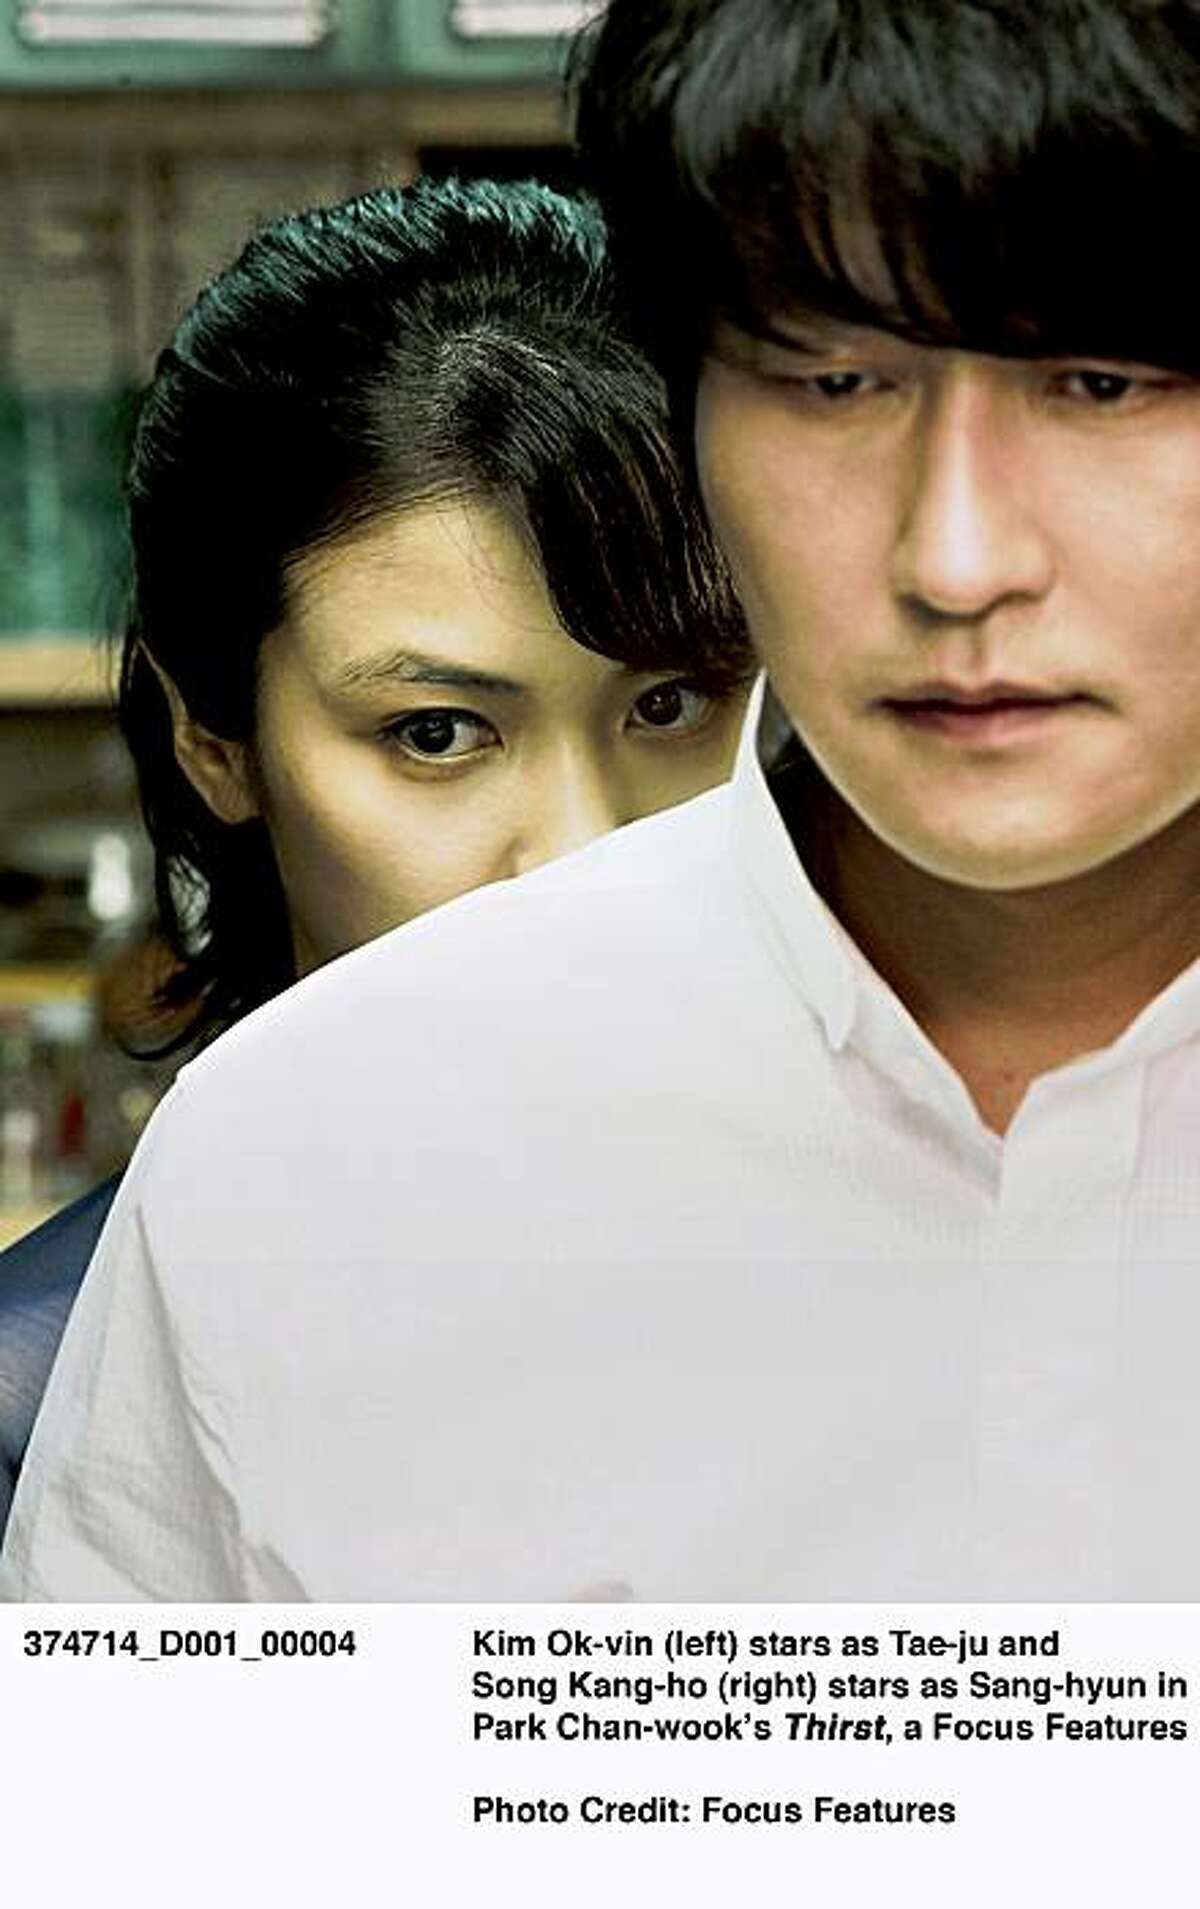 Kim Ok-vin (left) and Song Kang-ho star in Park Chan-wook's South Korean vampire movie "Thirst."